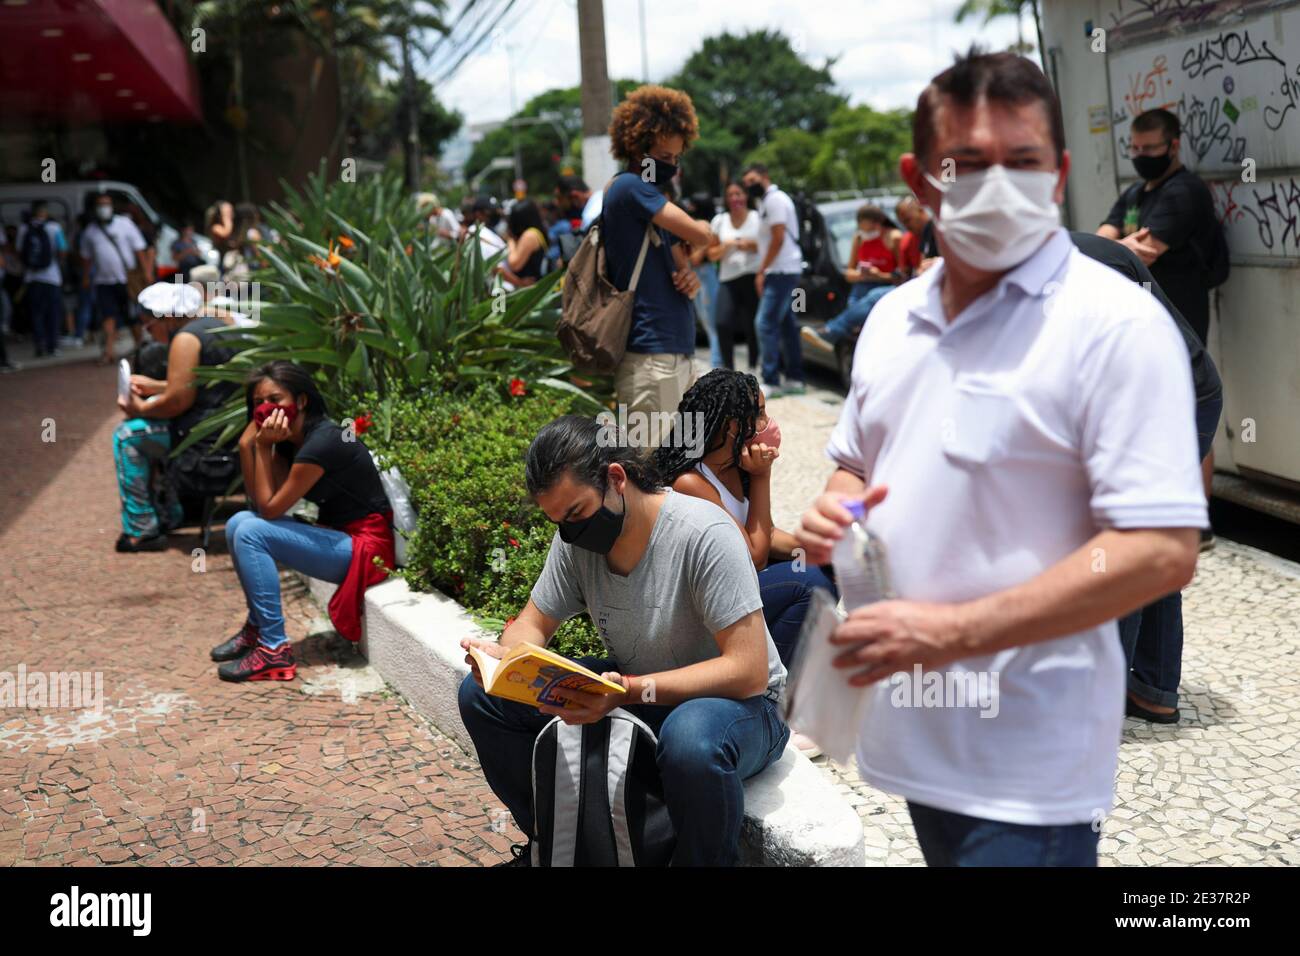 A man reads a book as people gather before the beginning of the ENEM, Exame Nacional do Ensino Medio (National High School Exam), during the outbreak of the coronavirus disease (COVID-19), at UNIP Vergueiro test site in Sao Paulo, Brazil January 17, 2021. REUTERS/Amanda Perobelli Stock Photo